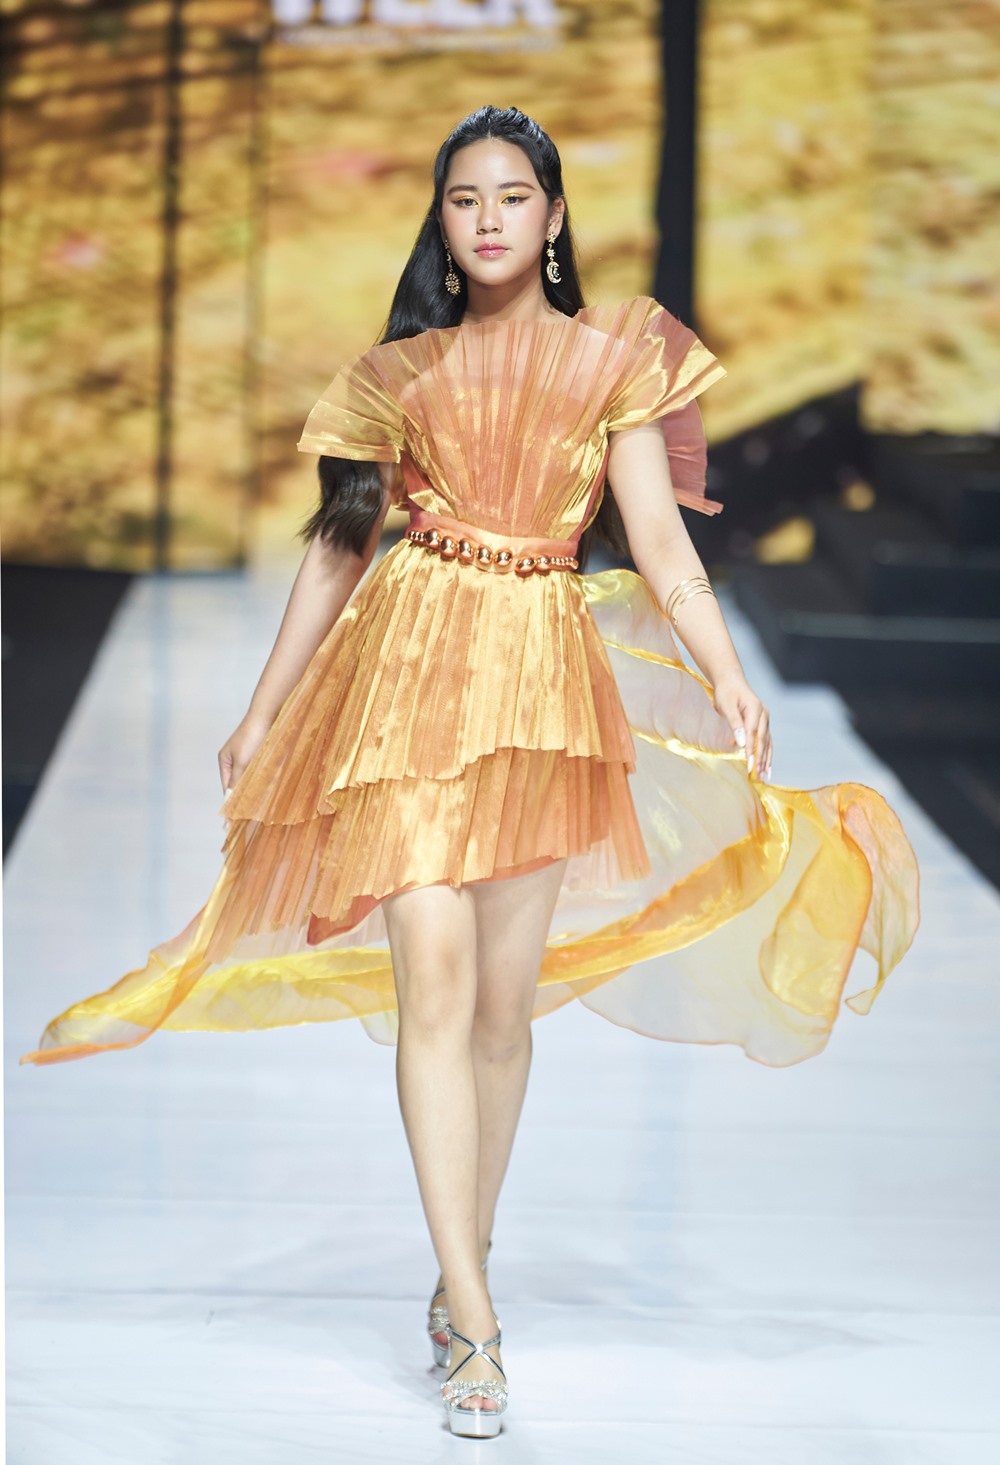 "Children of the Sun"  in the collection of designer Thao Nguyen - 12